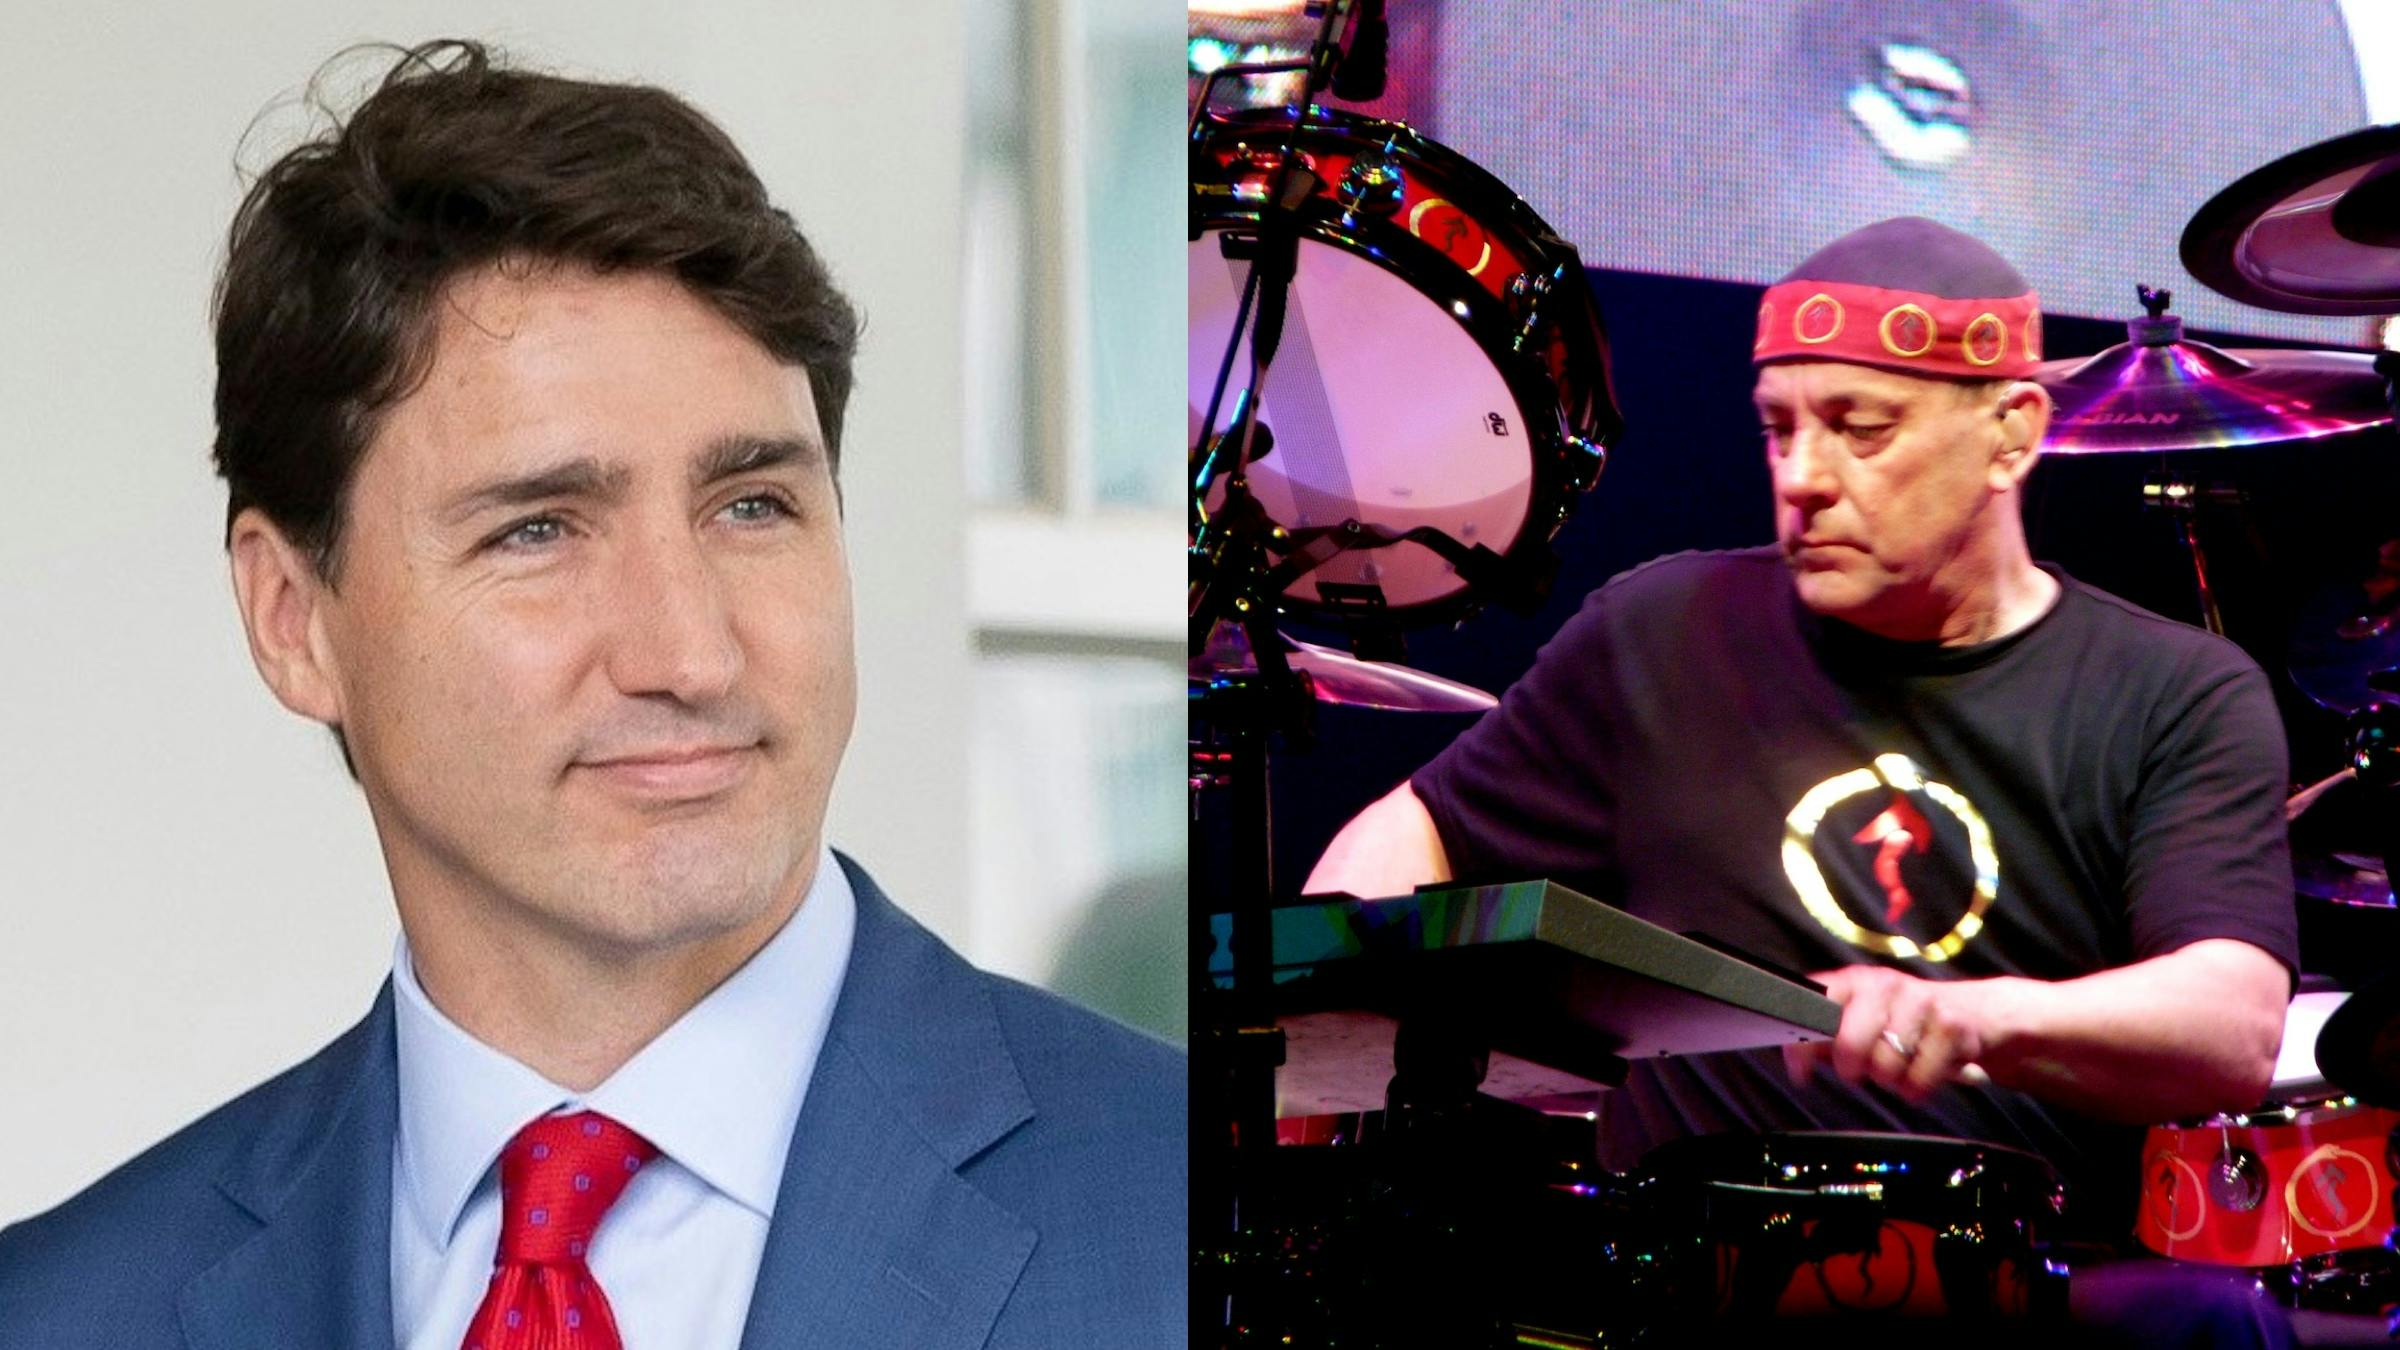 Canadian PM Justin Trudeau On Rush's Neil Peart: "We've Lost A Legend"